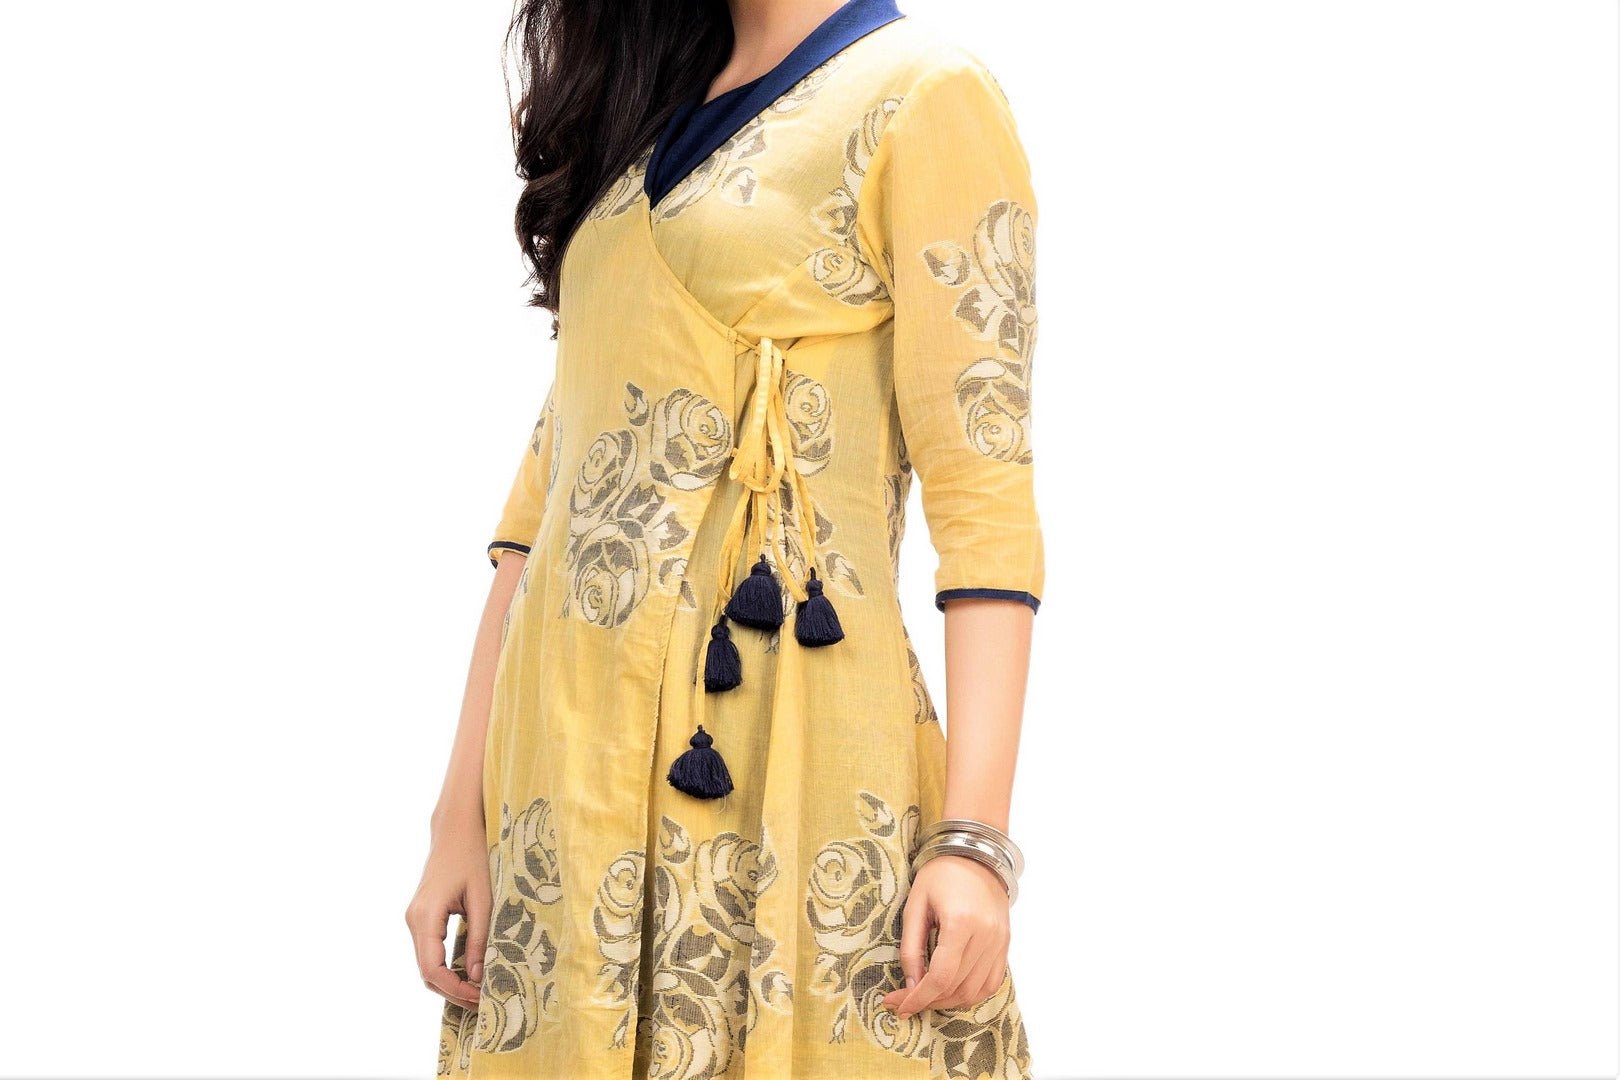 Buy mustard yellow Jamdani wrap dress online in USA and woven rose motifs. Keep your wardrobe updated with a range of stylish Indian designer dresses from Pure Elegance fashion store in USA. A stylish range of Indian clothing, suits, Indowestern dresses are available at our online store to elevate your style.-side